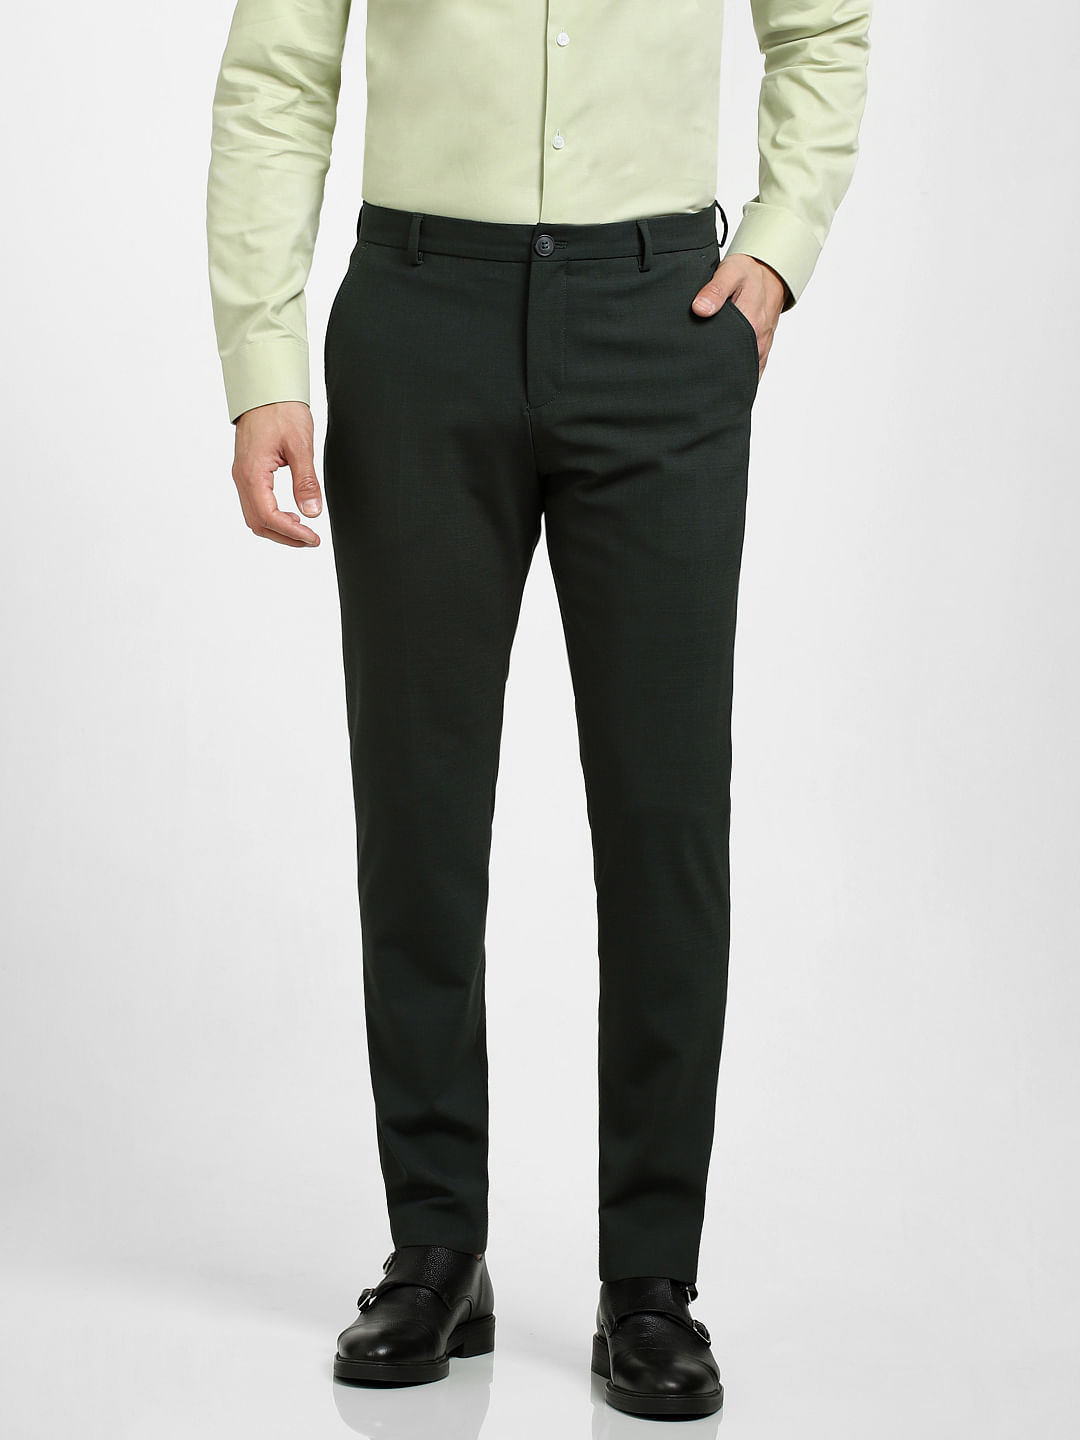 Buy JEENAY Synthetic Formal Pants for Men | Mens Fashion Wrinkle-free  Stylish Slim Fit Men's Wear Trouser Pant for Office or Party - 30 US,  Bottle Green Online at Best Prices in